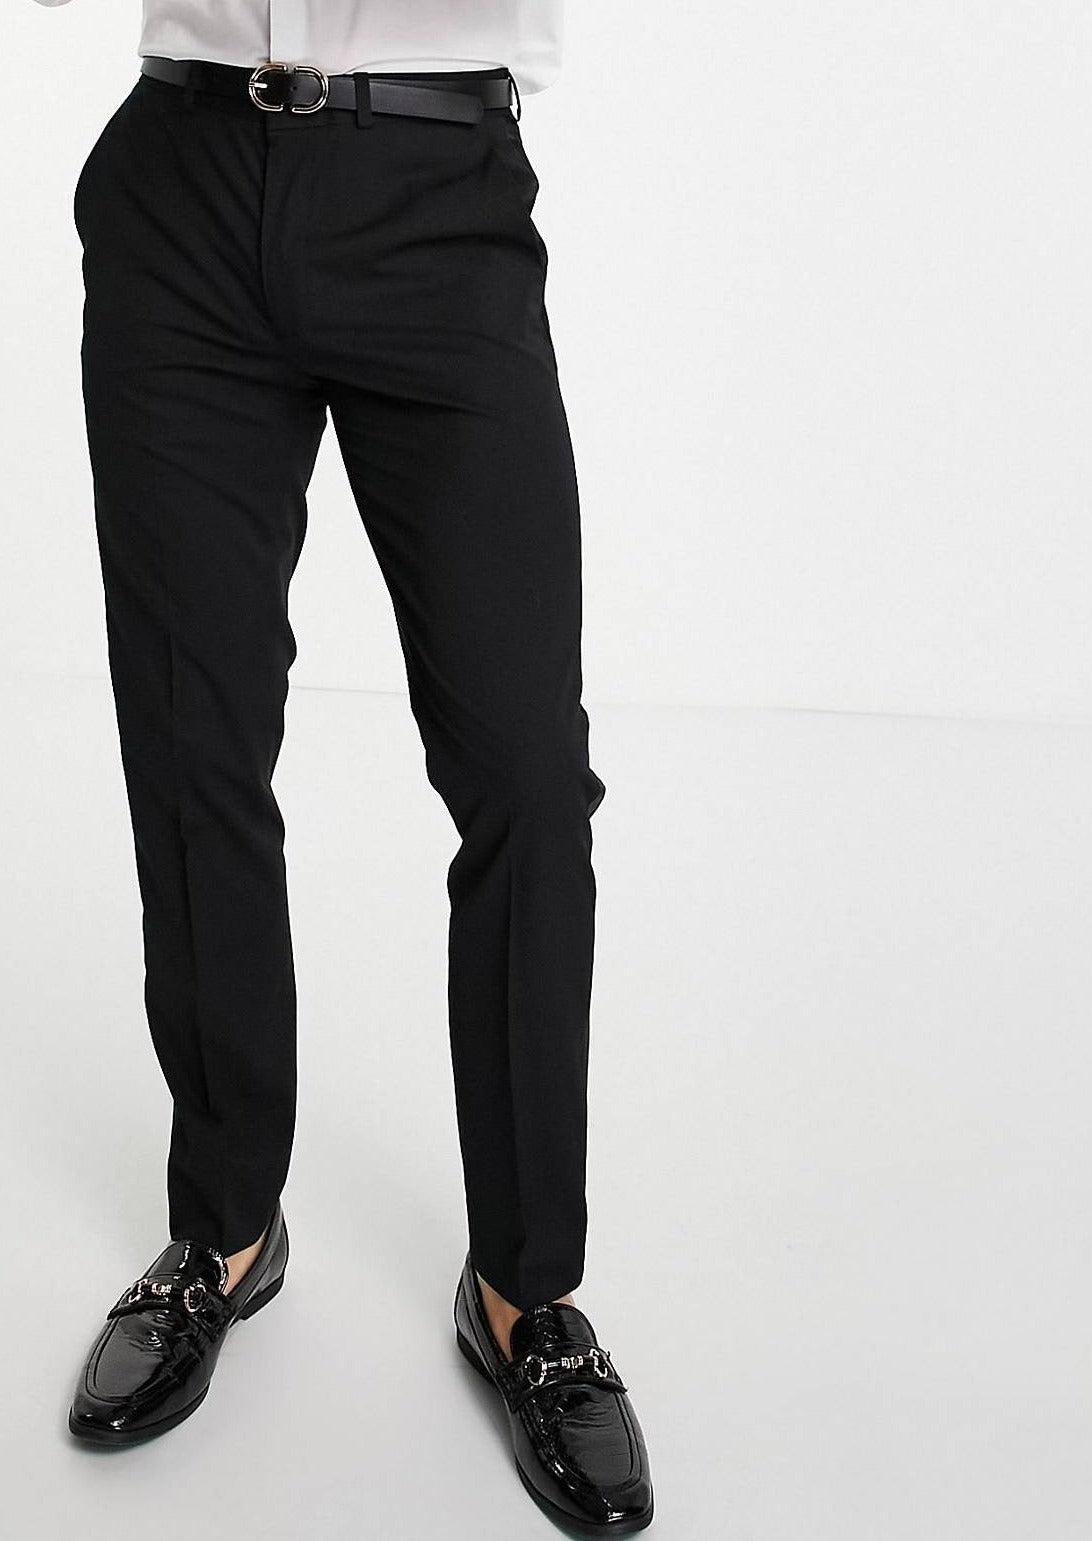 Twisted Tailor Brondesbury Skinny Fit White Tuxedo Trousers